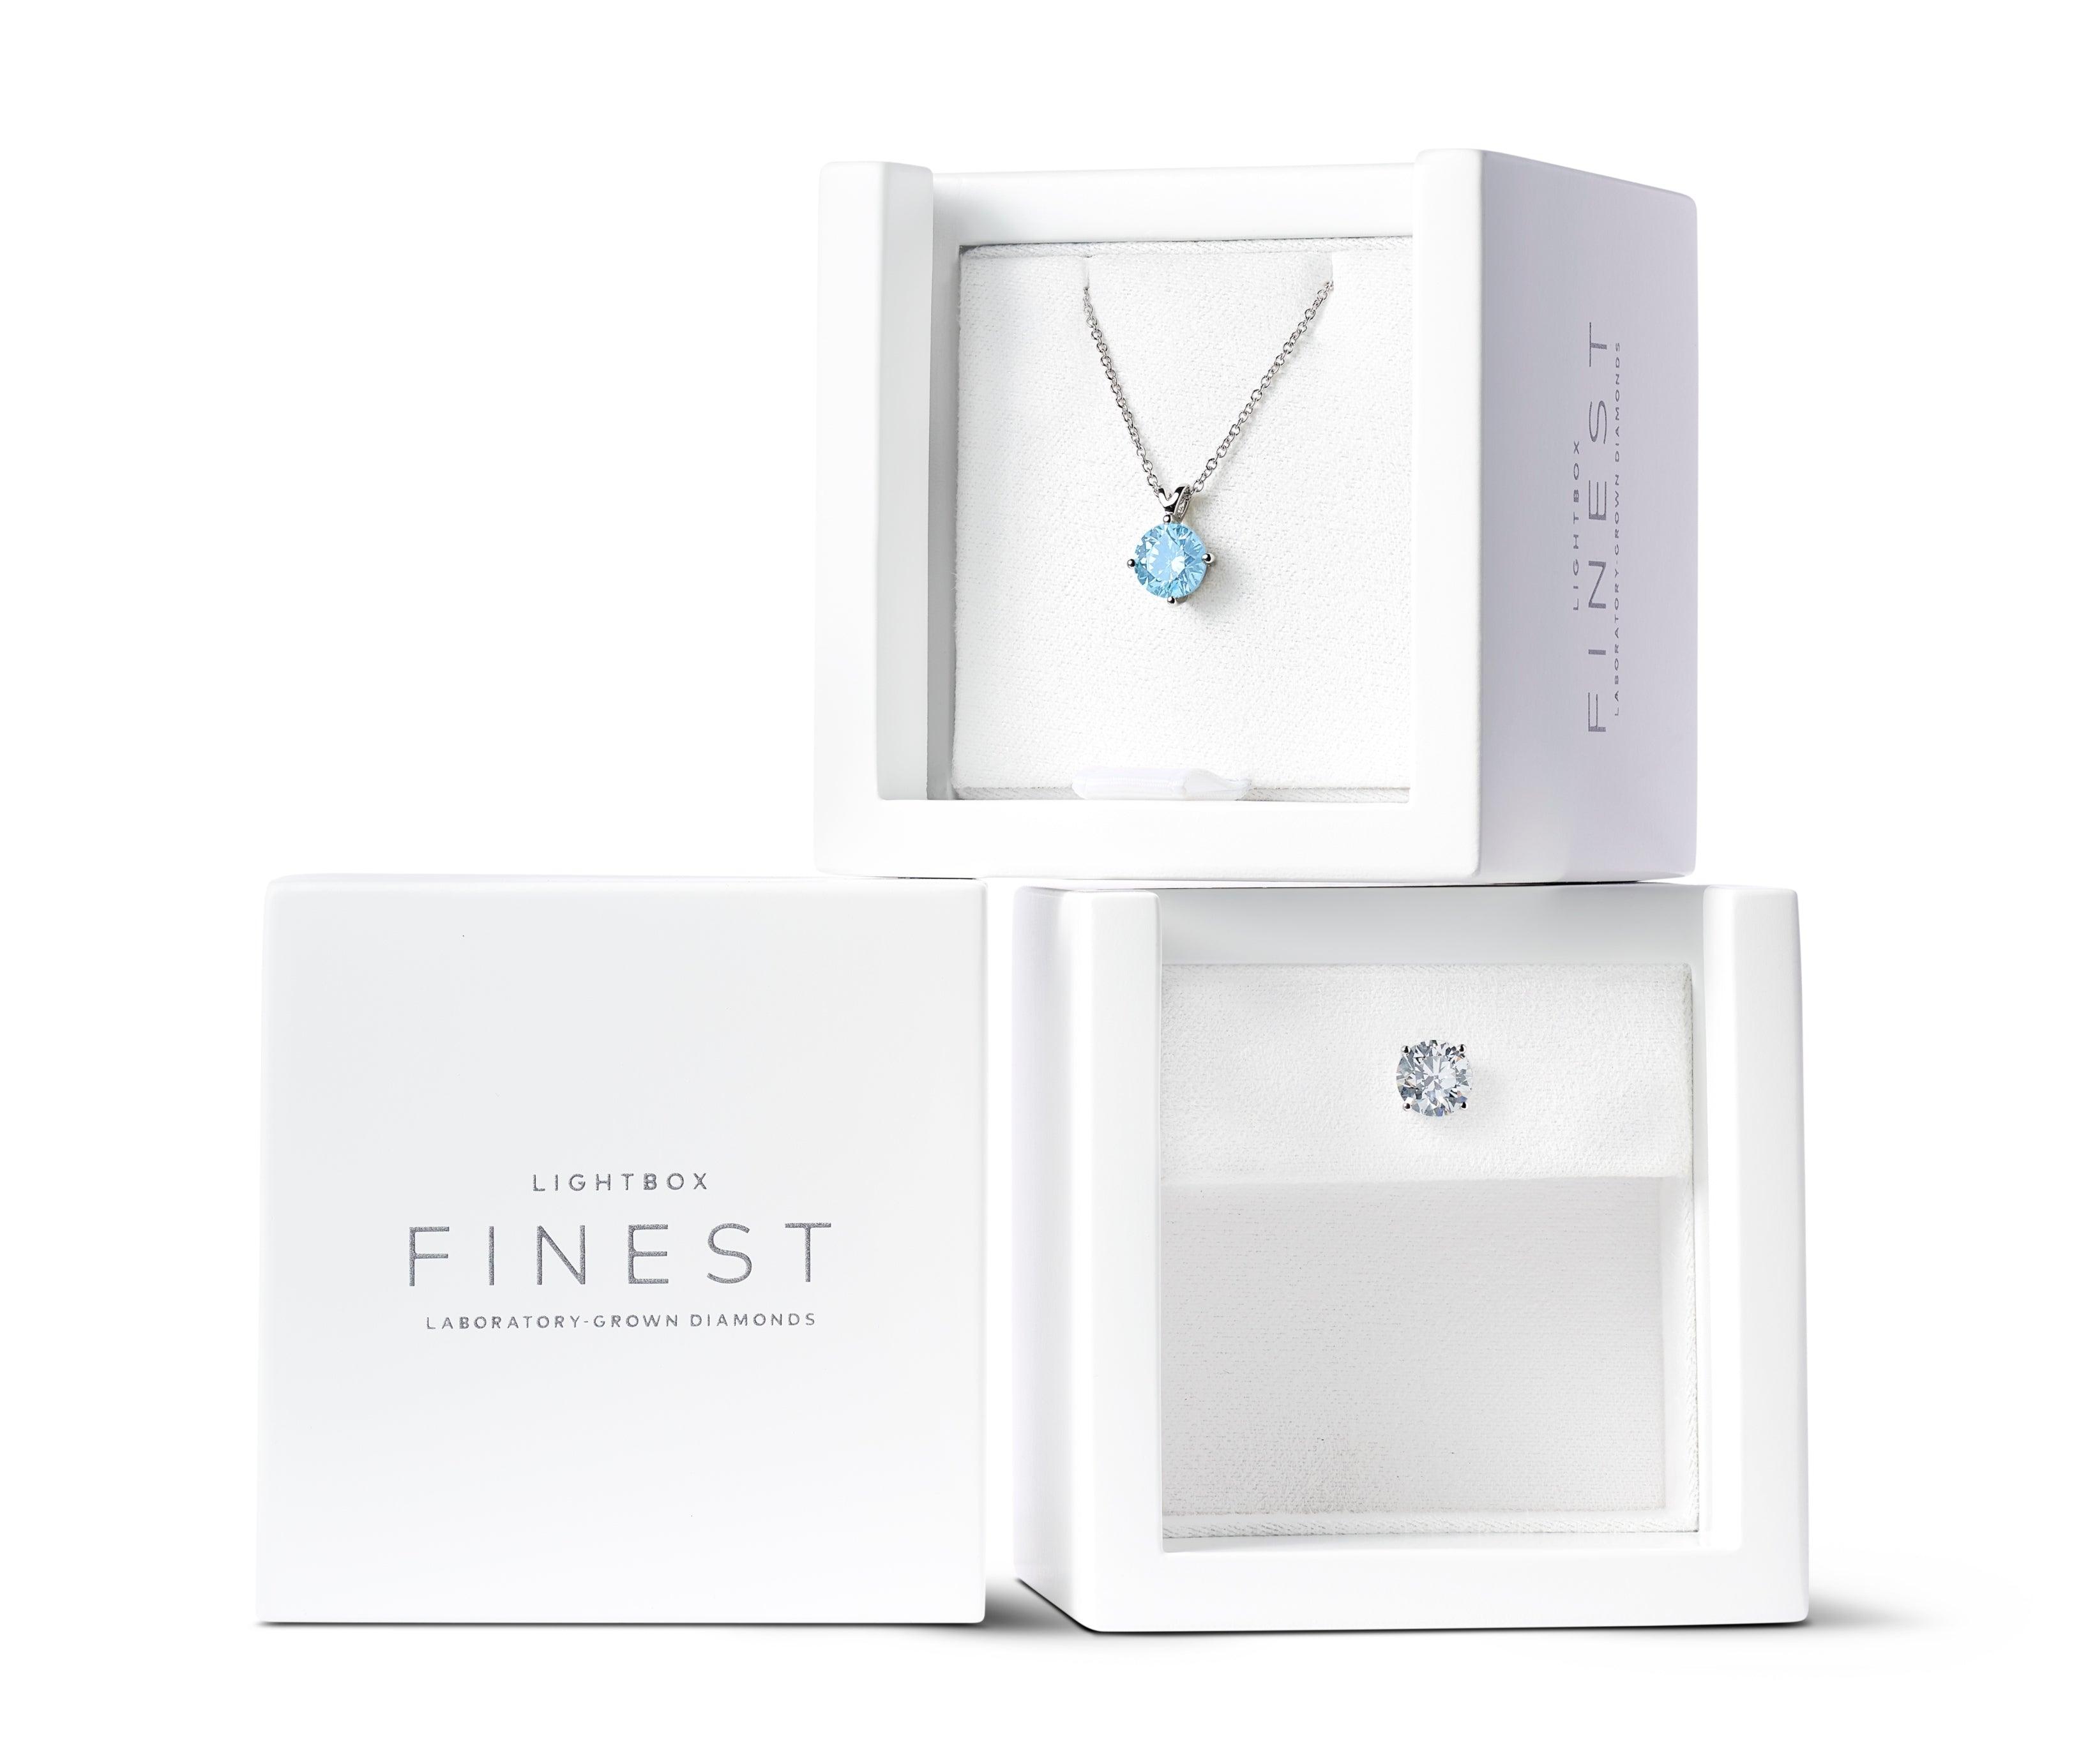 Image of Lightbox Finest™ packaging with single stud and pendant